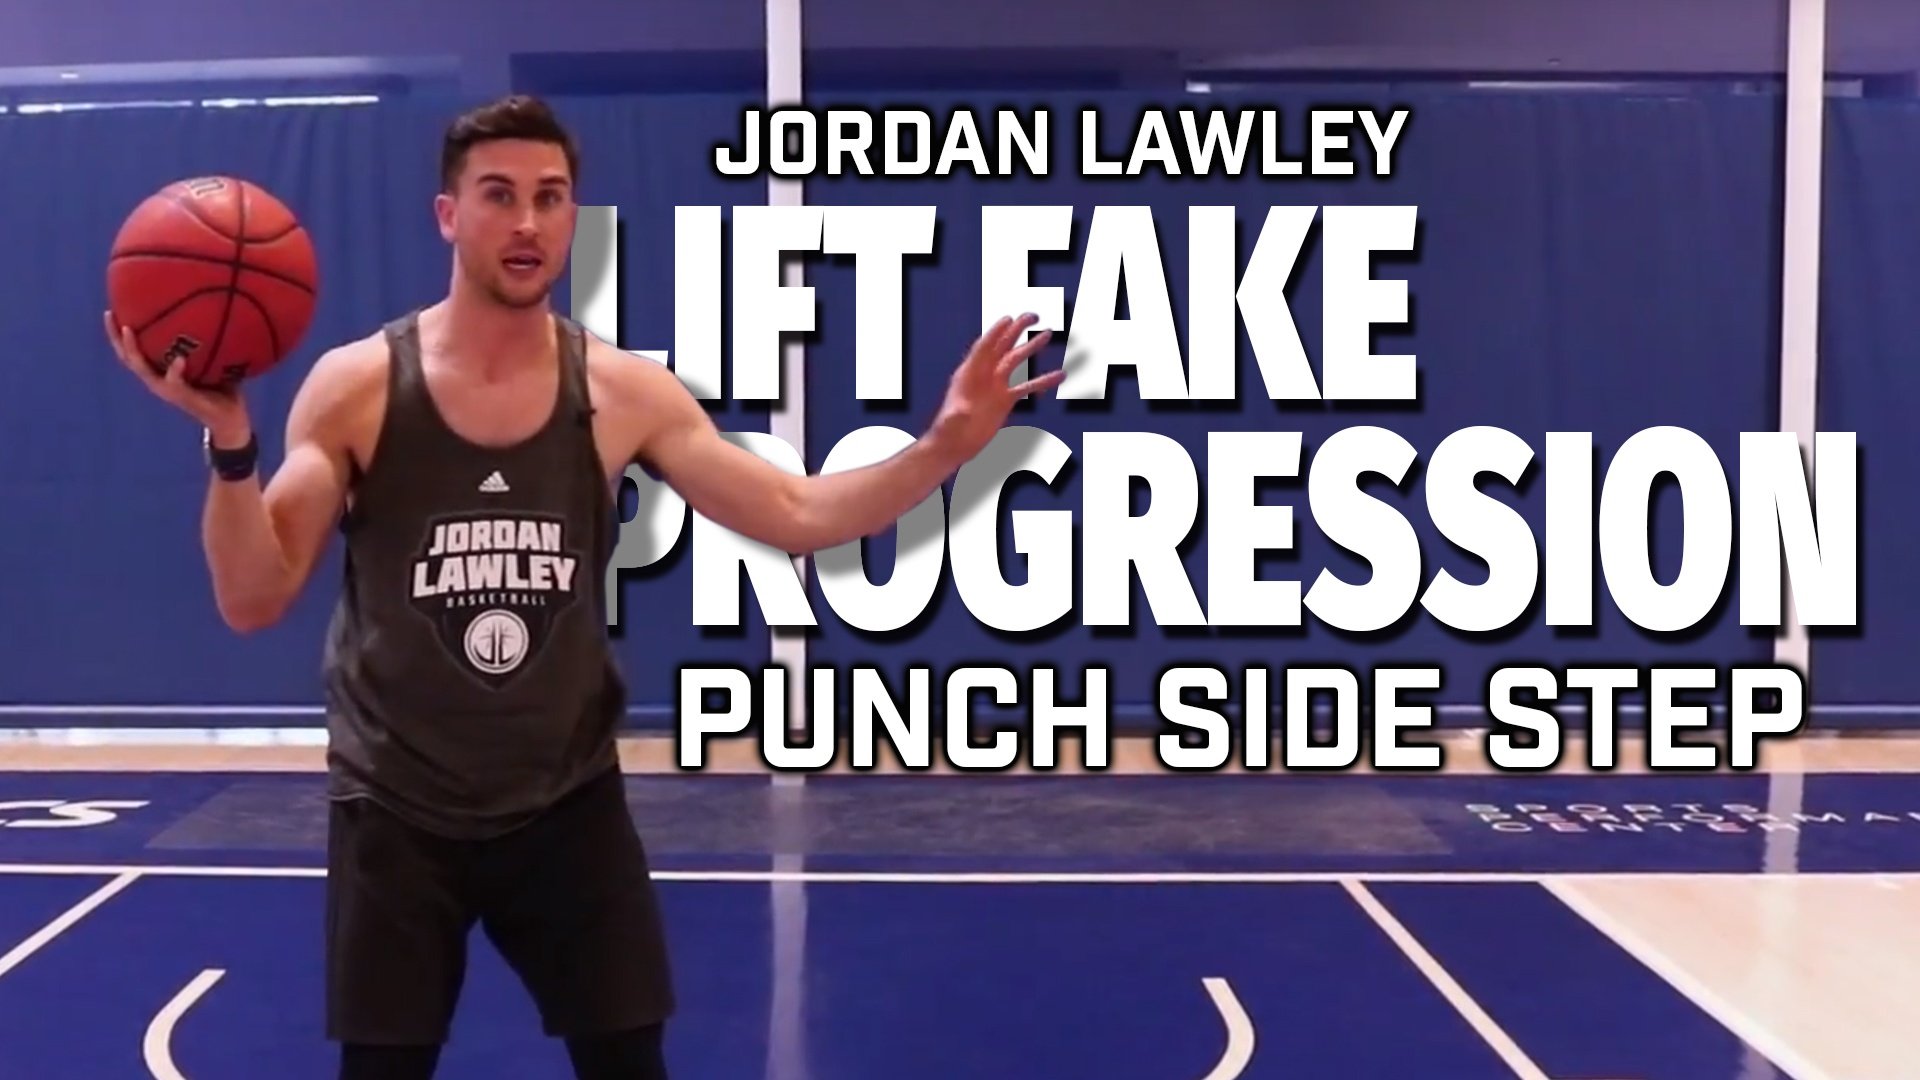 Basketball Drills: Lift Fake Punch Side Step with Jordan Lawley